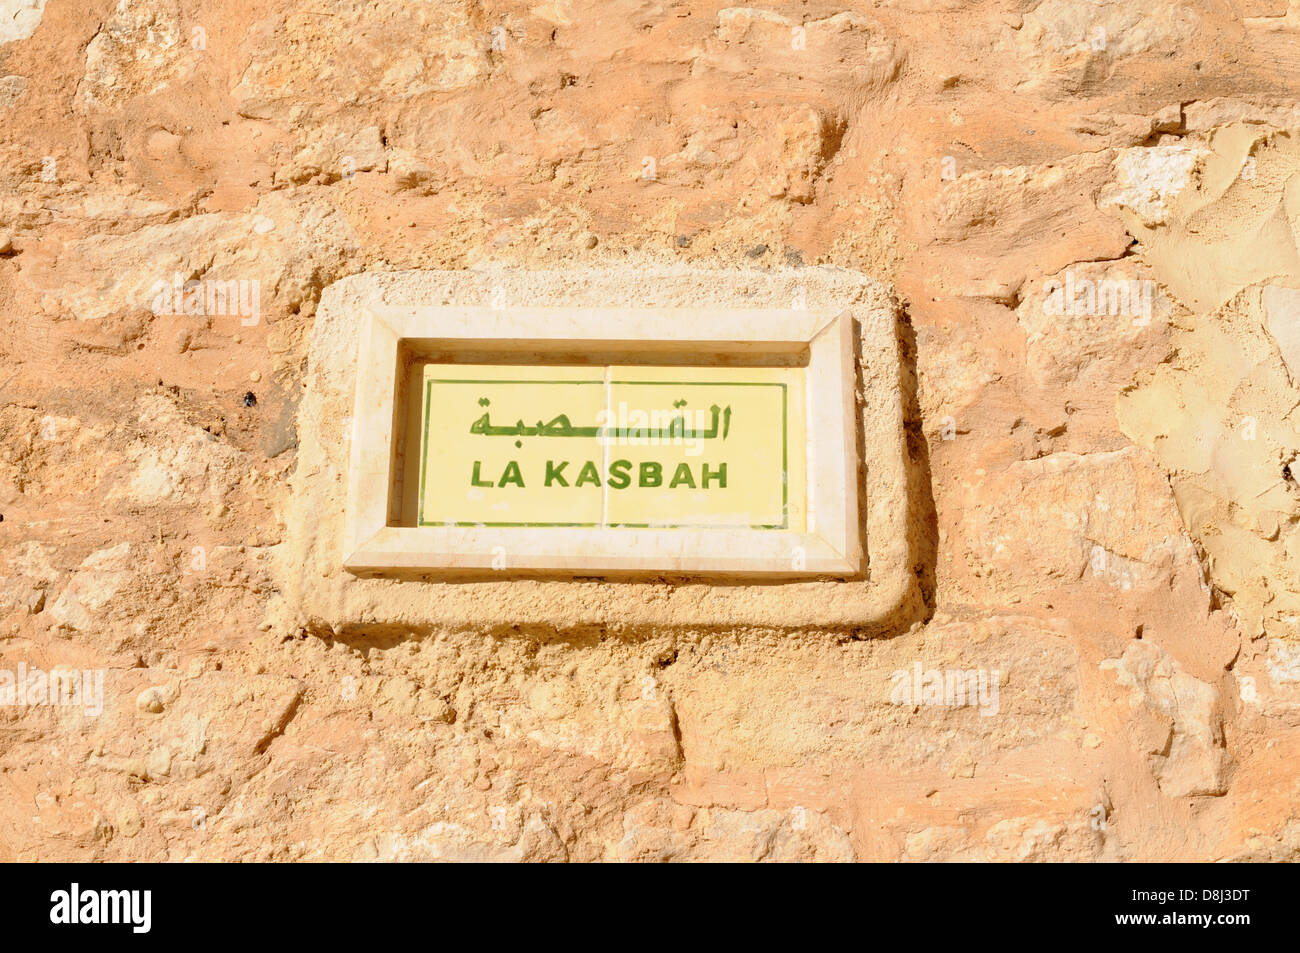 Kasbah sign on the old walls at Le Kef Tunisia Stock Photo